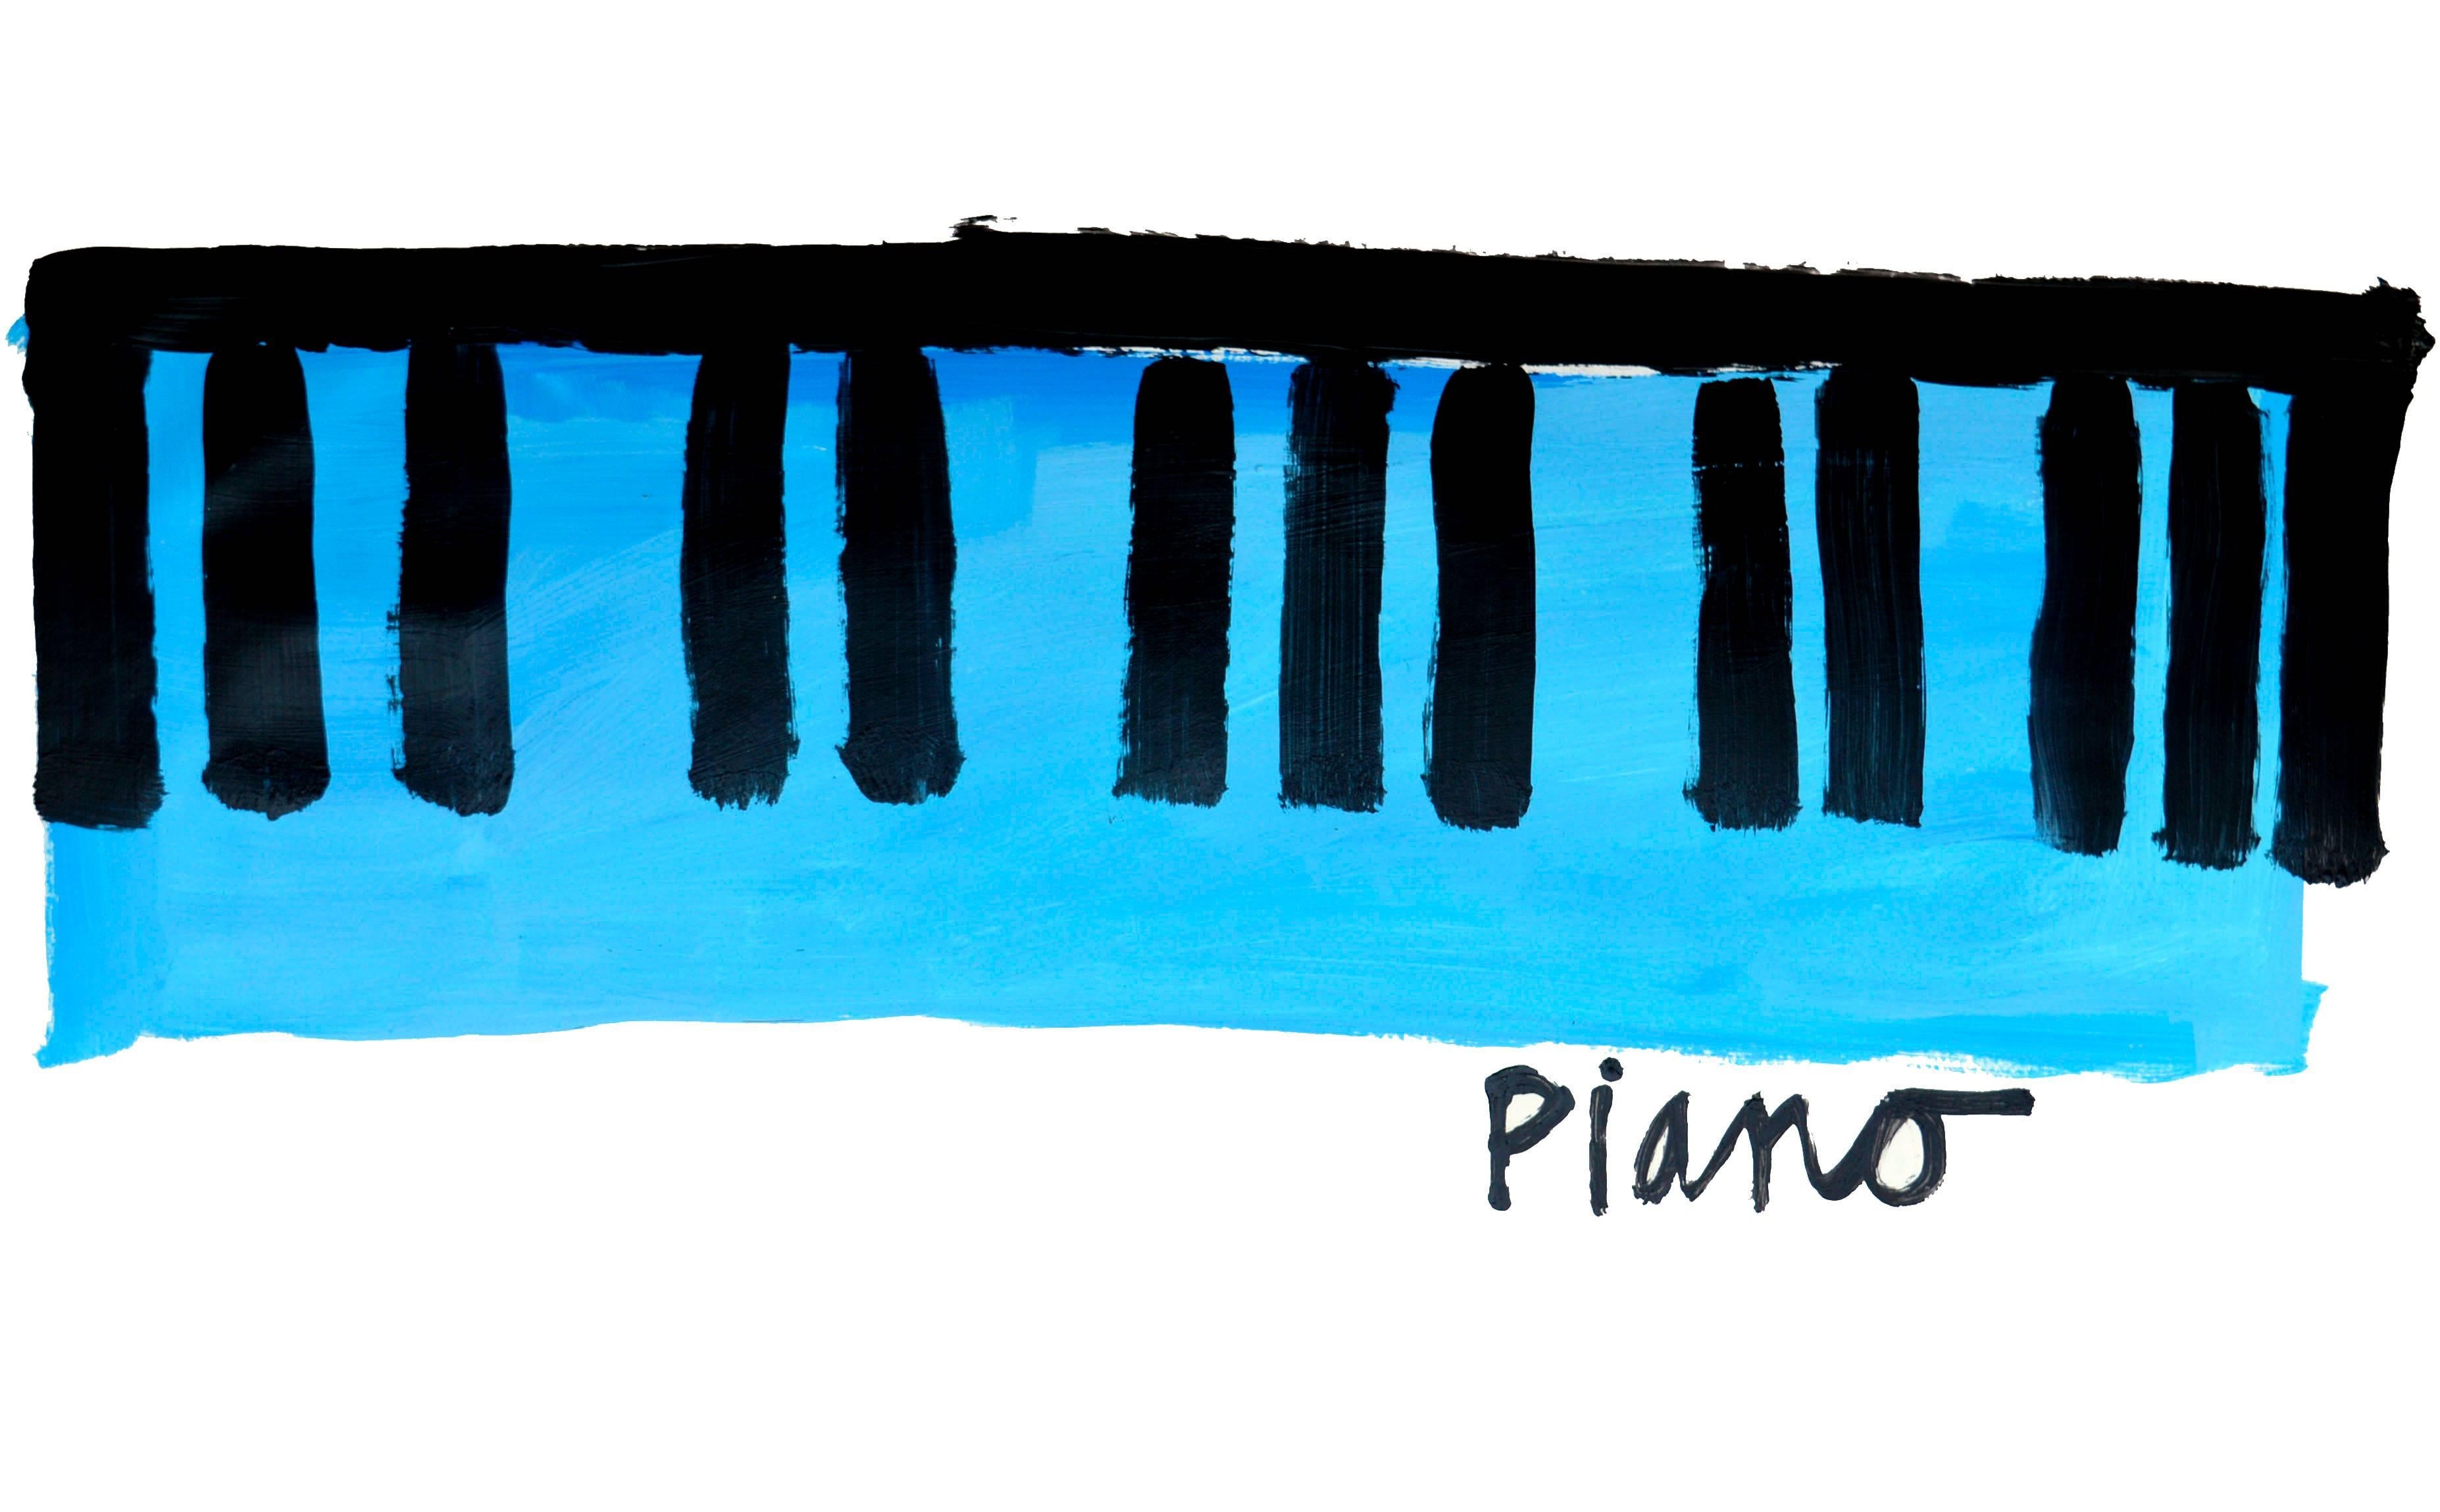 Piano  - Painting by Michael William Eggleston